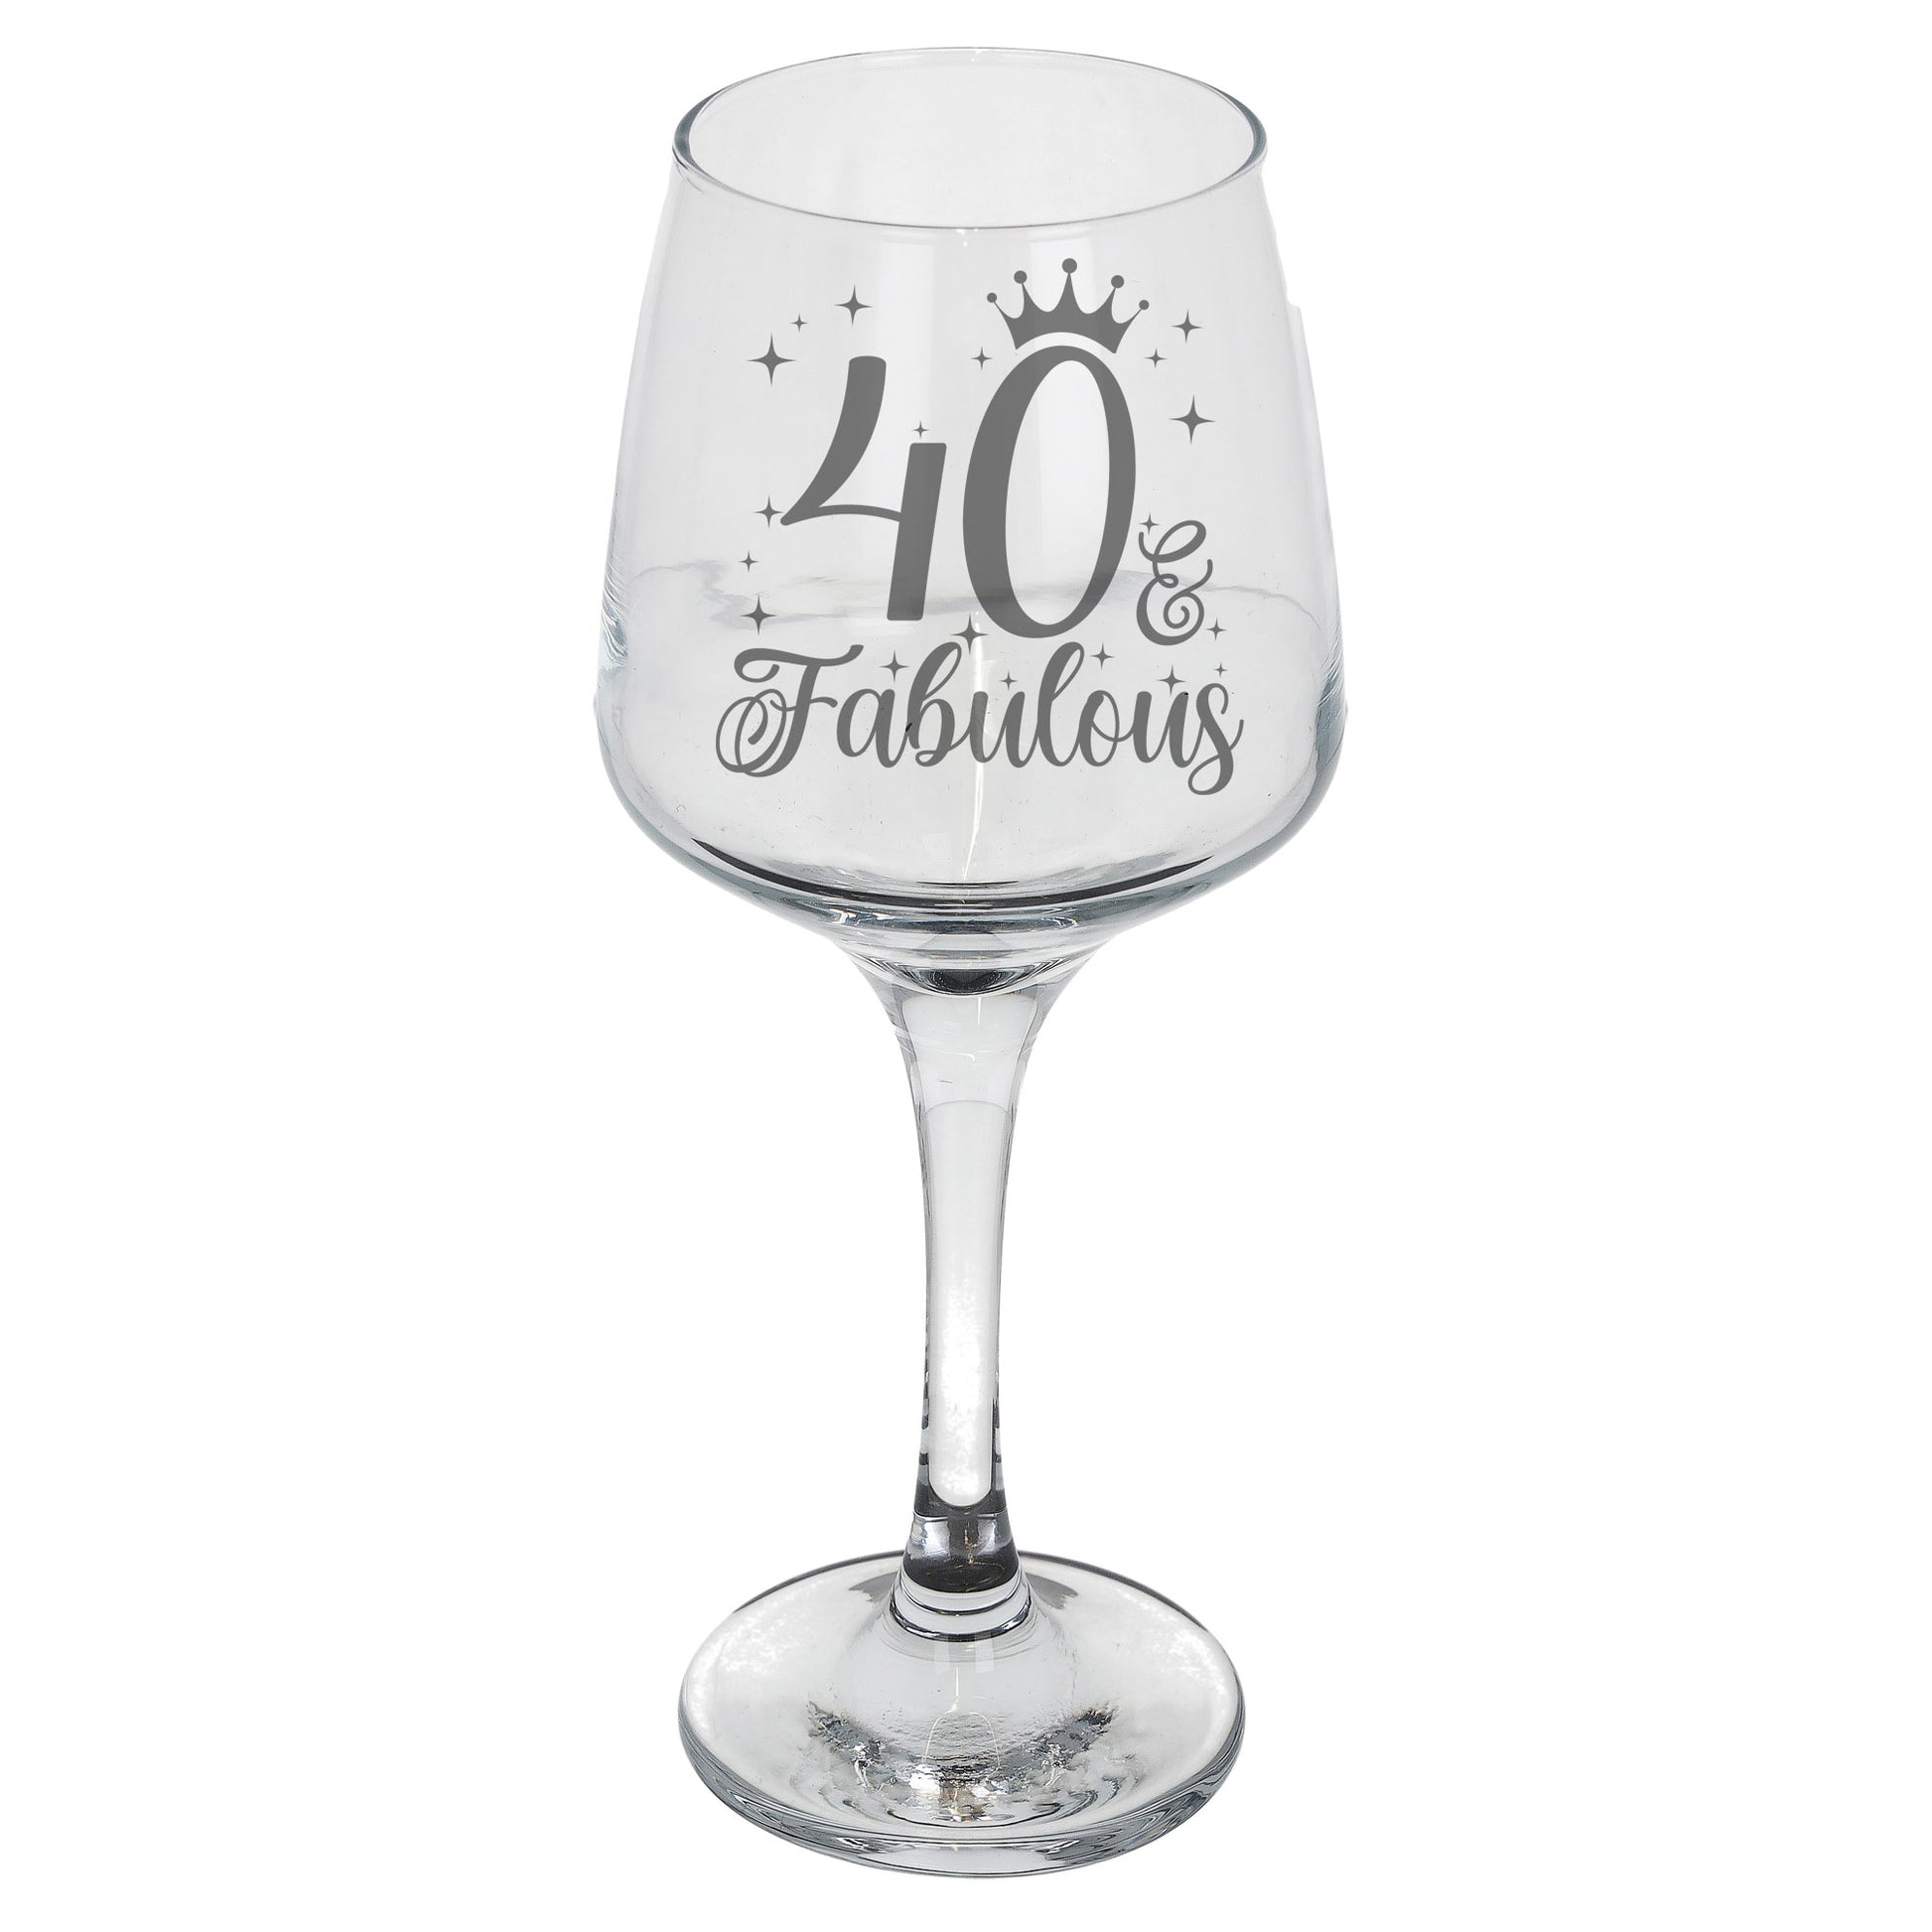 40 & Fabulous 40th Birthday Gift Engraved Wine Glass and/or Coaster Set  - Always Looking Good -   